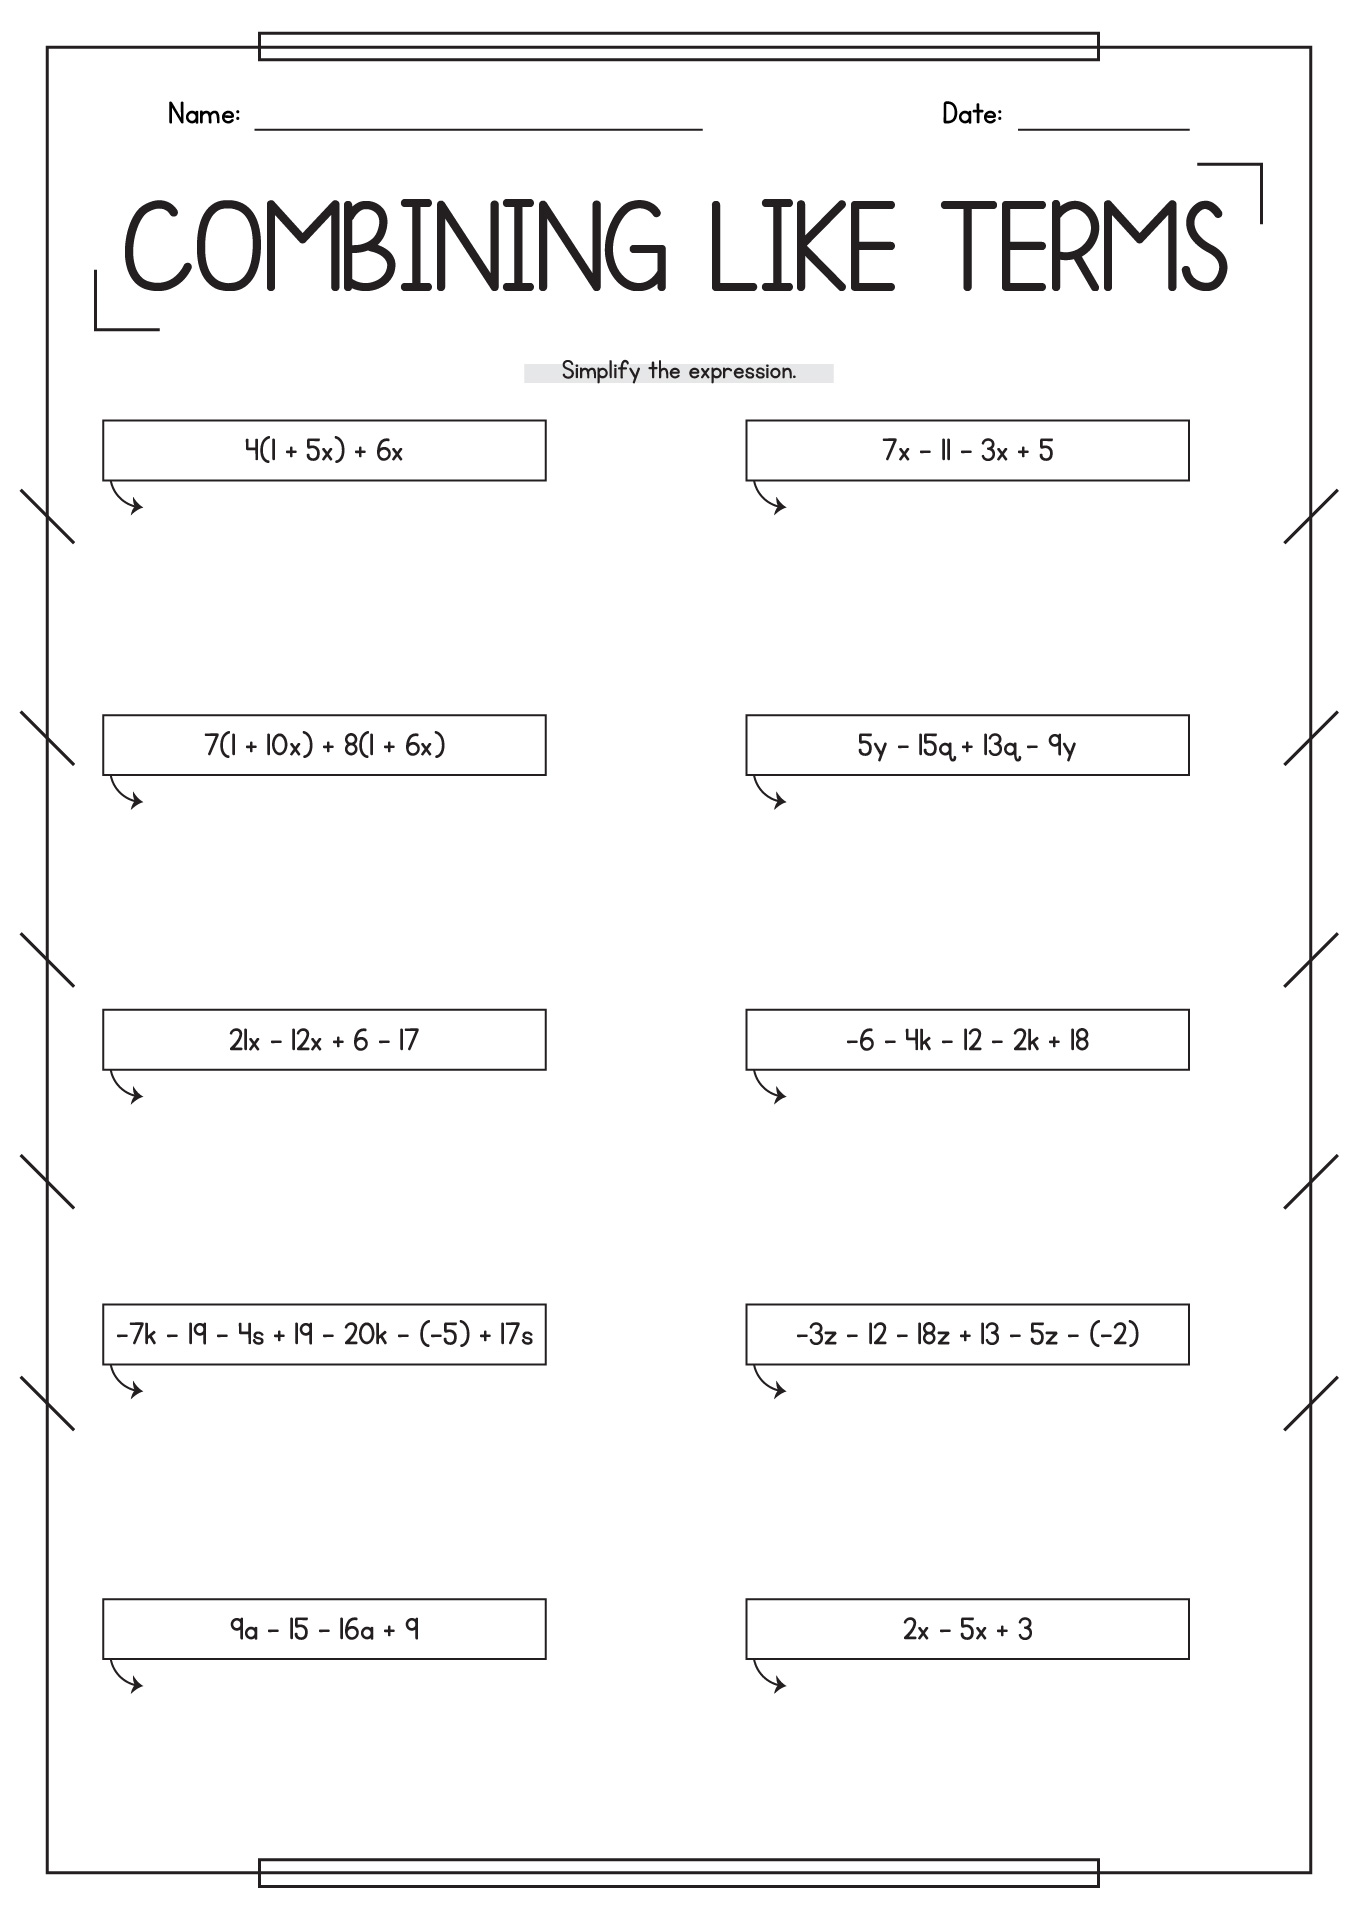 13 Best Images of Combining Like Terms Worksheet Answer Key  Algebra 1 Combining Like Terms 